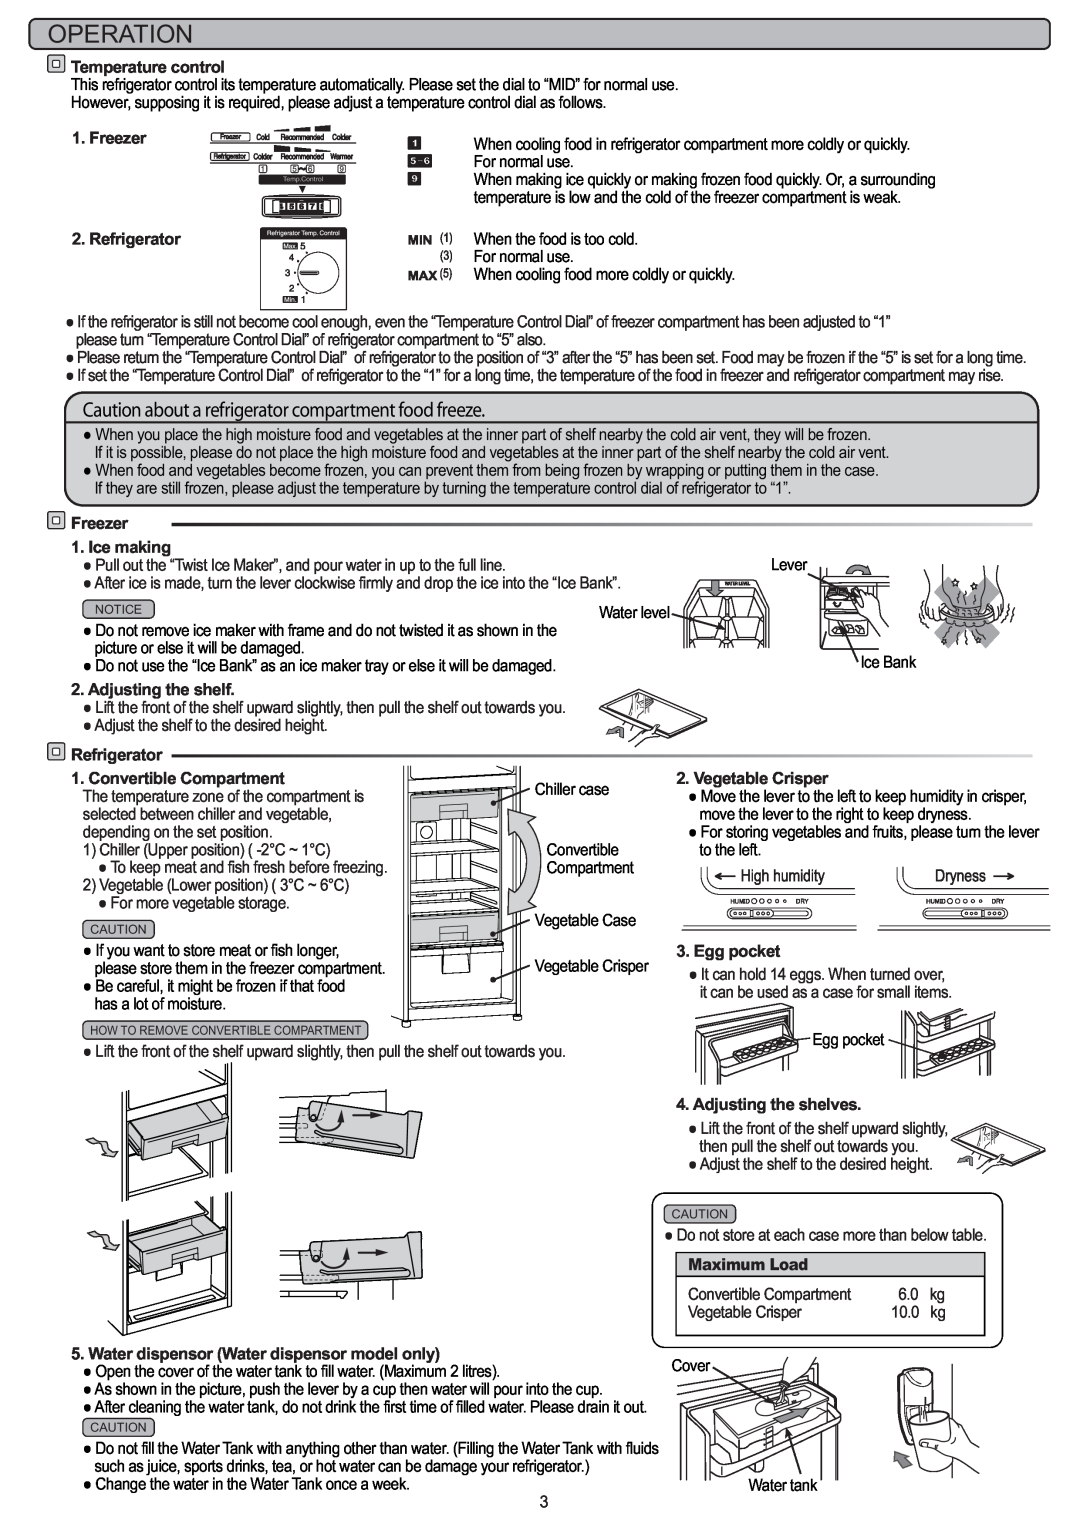 Hitachi instruction manual Operation, Caution about a refrigerator compartment food freeze 